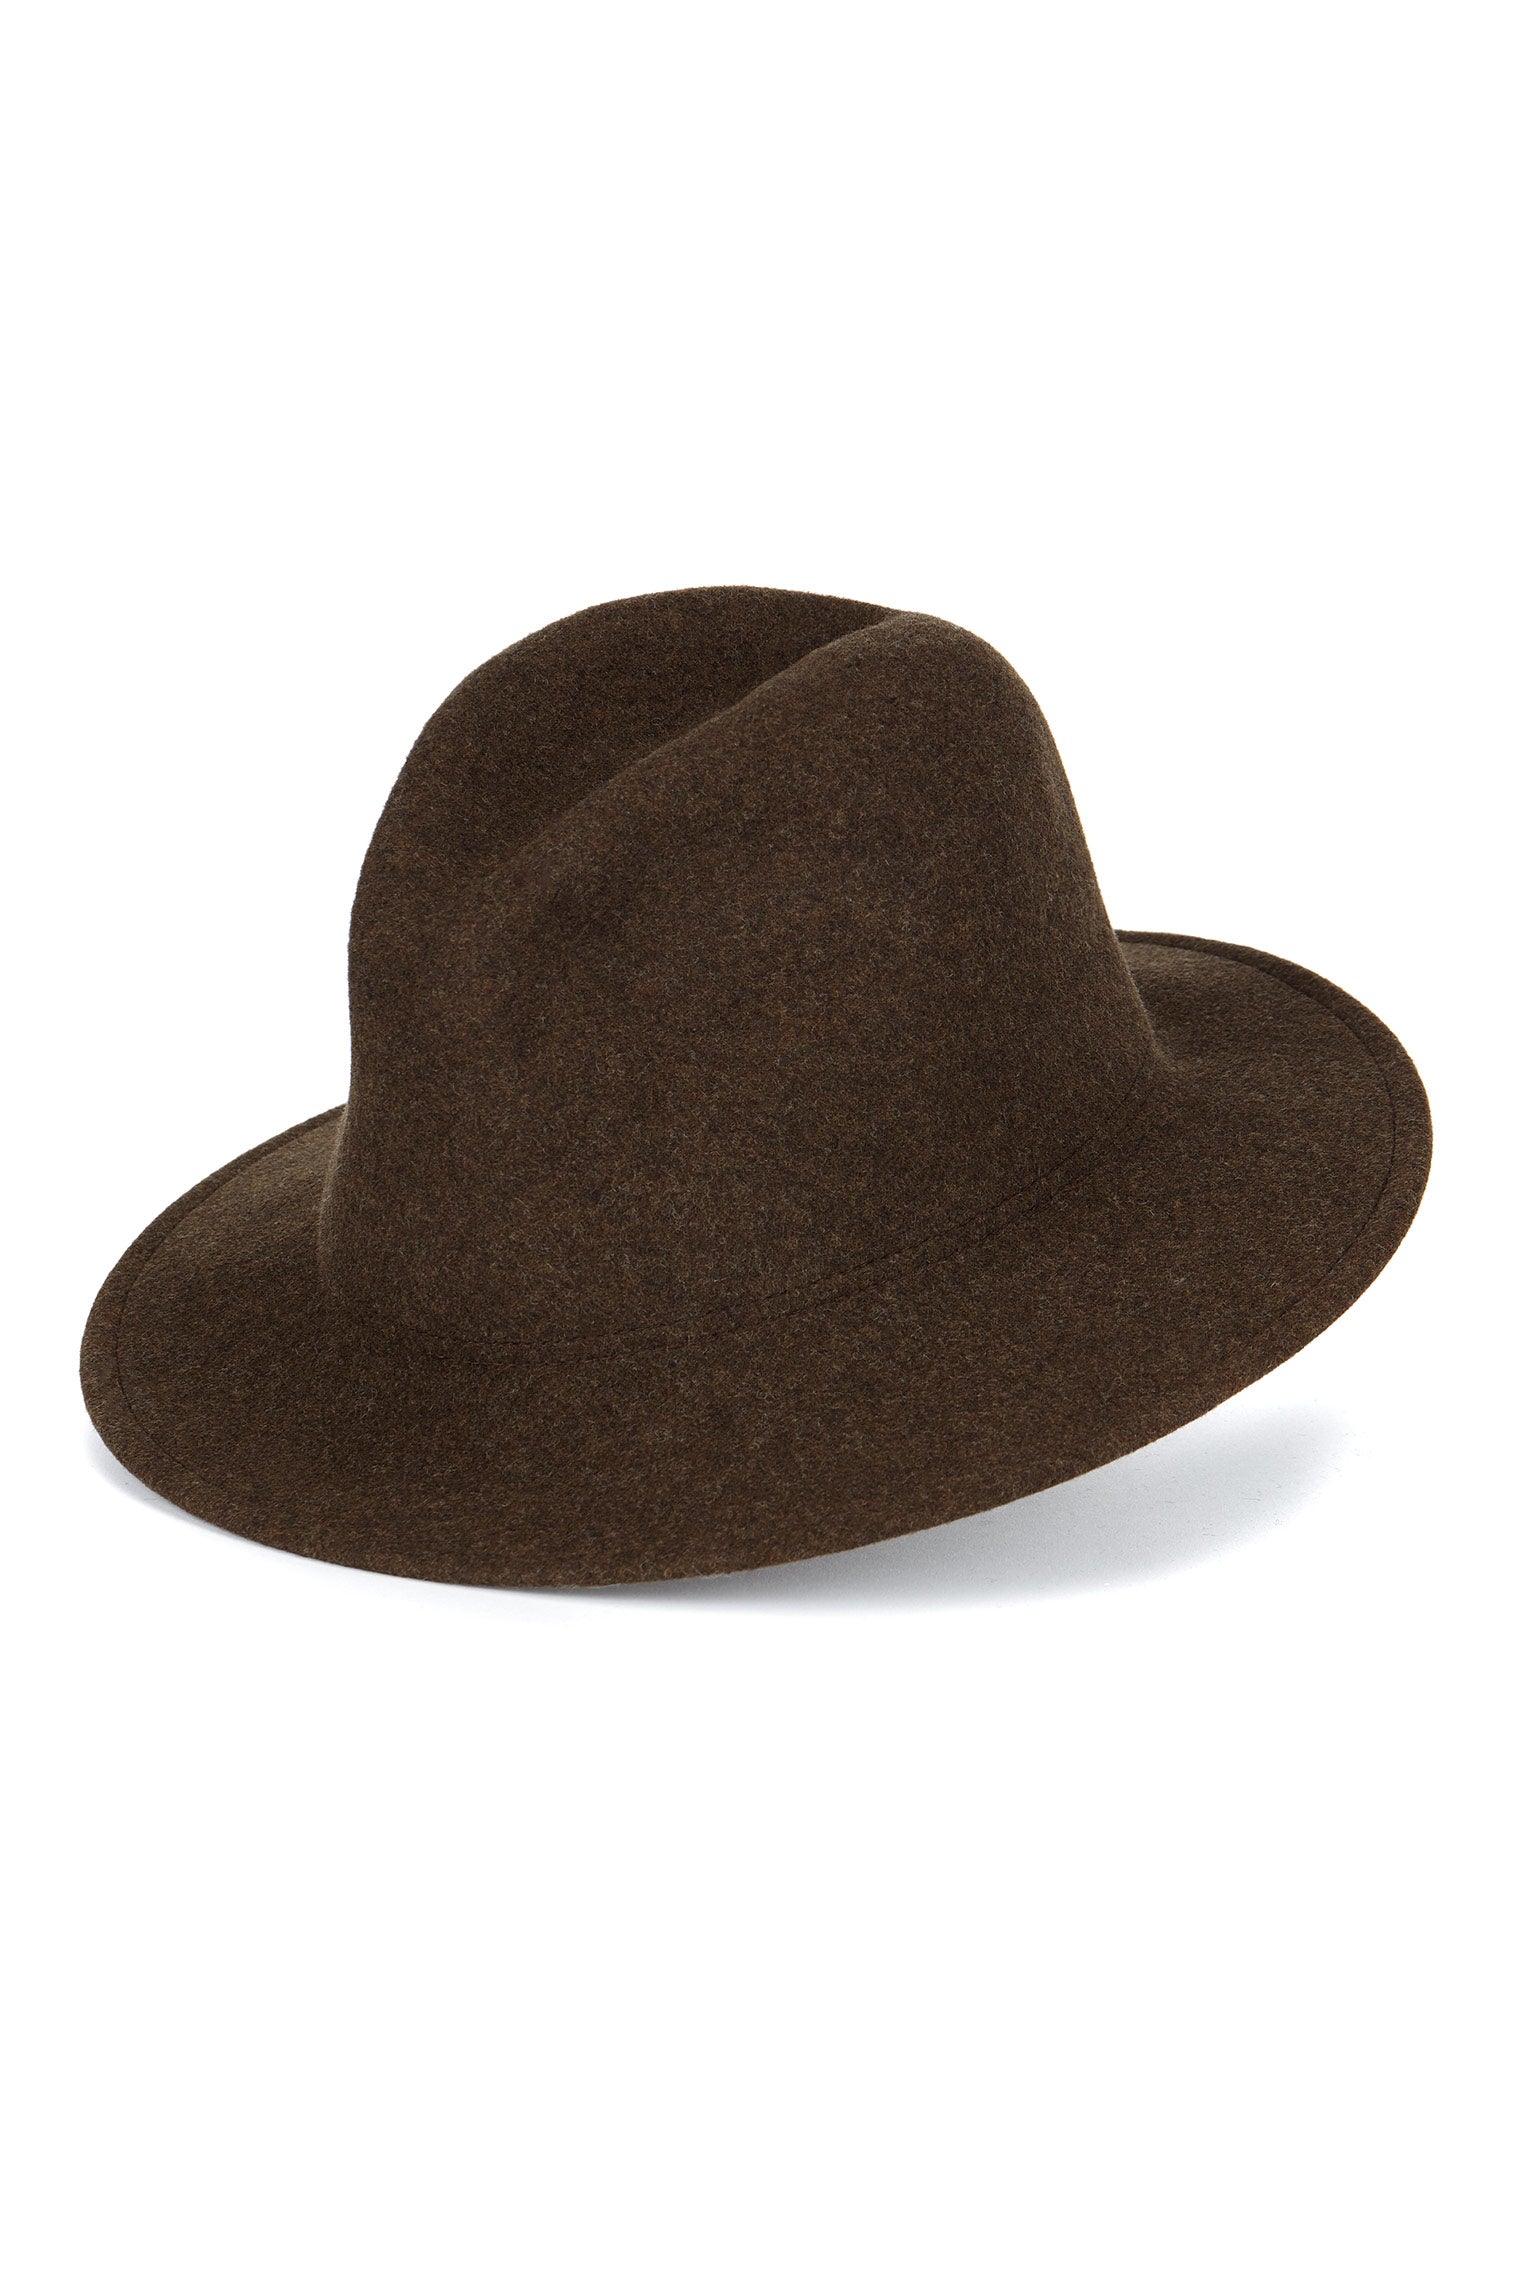 Rambler Rollable Trilby - Hats for Oval Face Shapes - Lock & Co. Hatters London UK